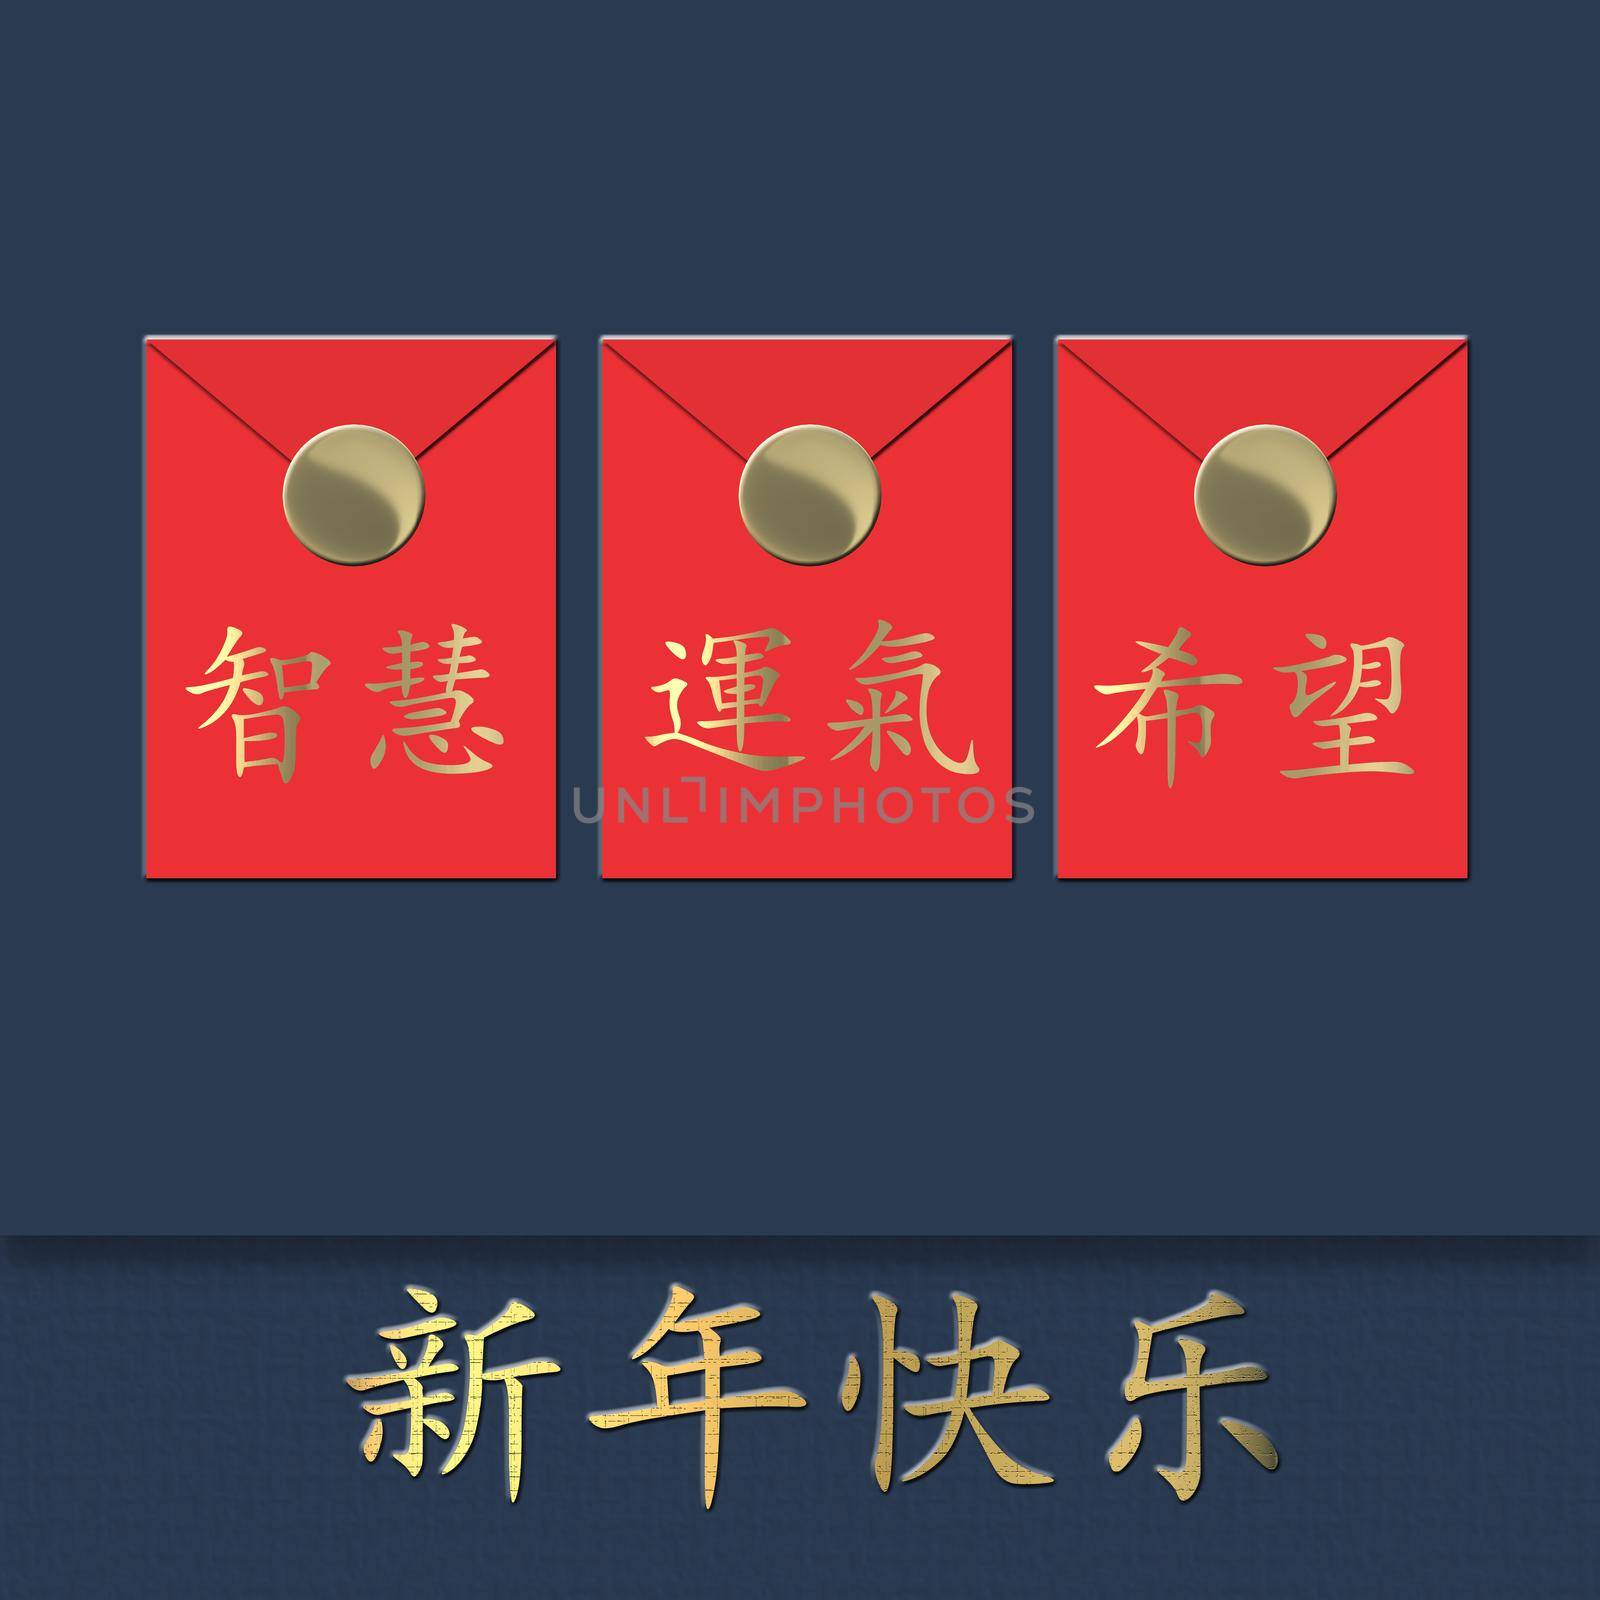 Chinese New Year design by NelliPolk